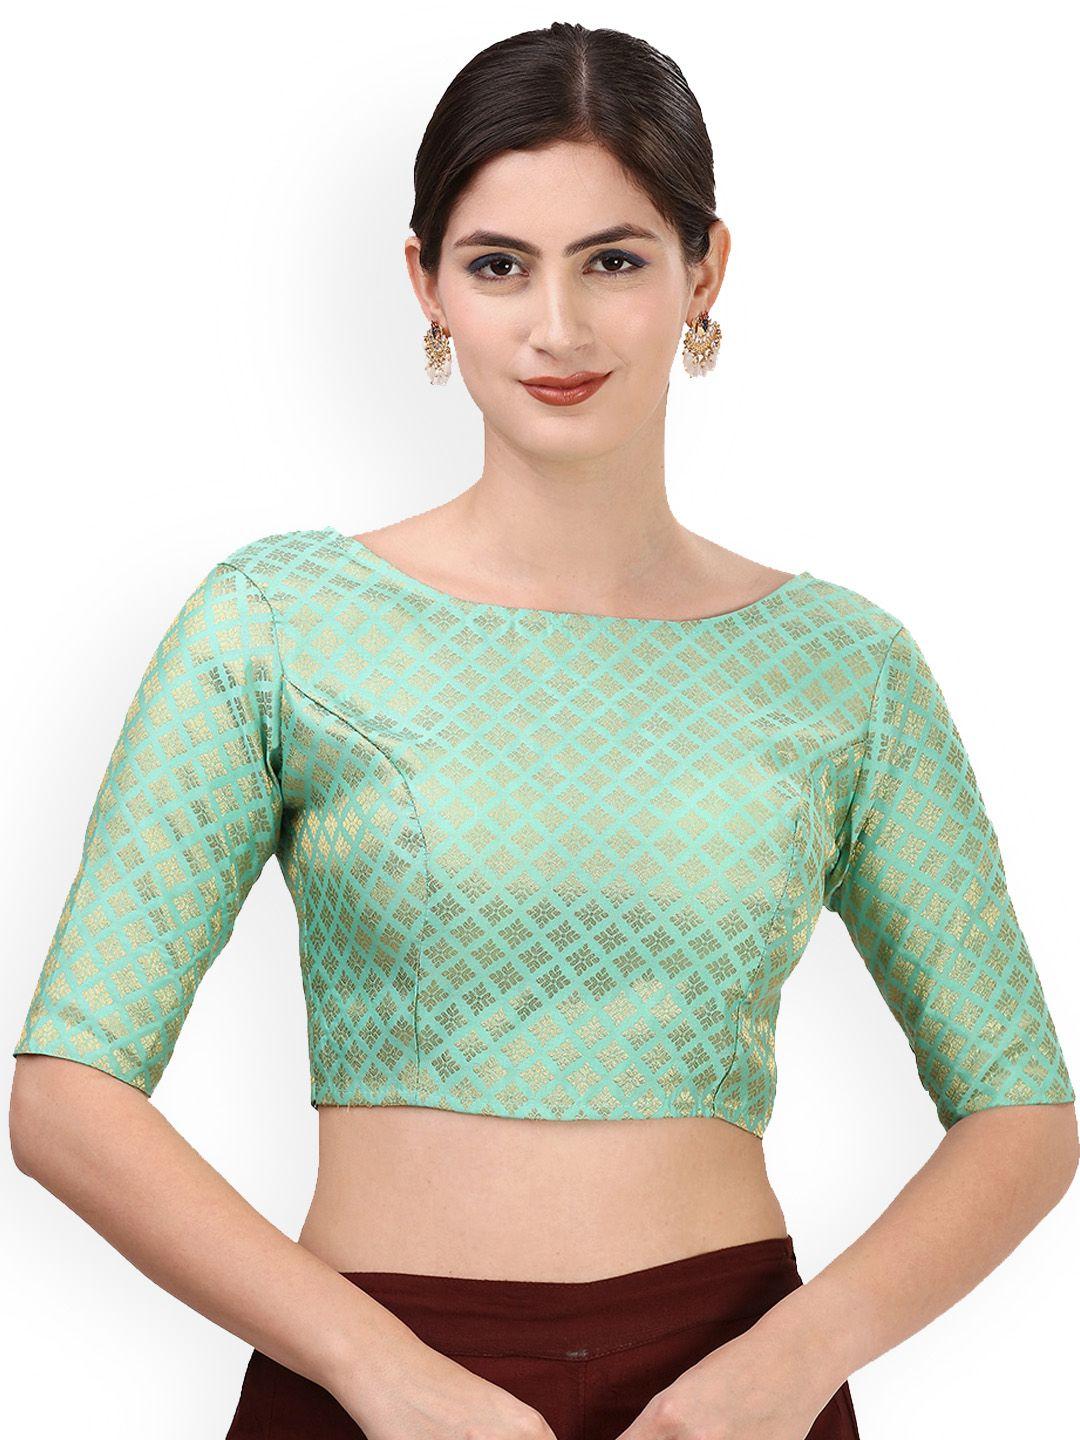 oomph! woven design boat neck saree blouse